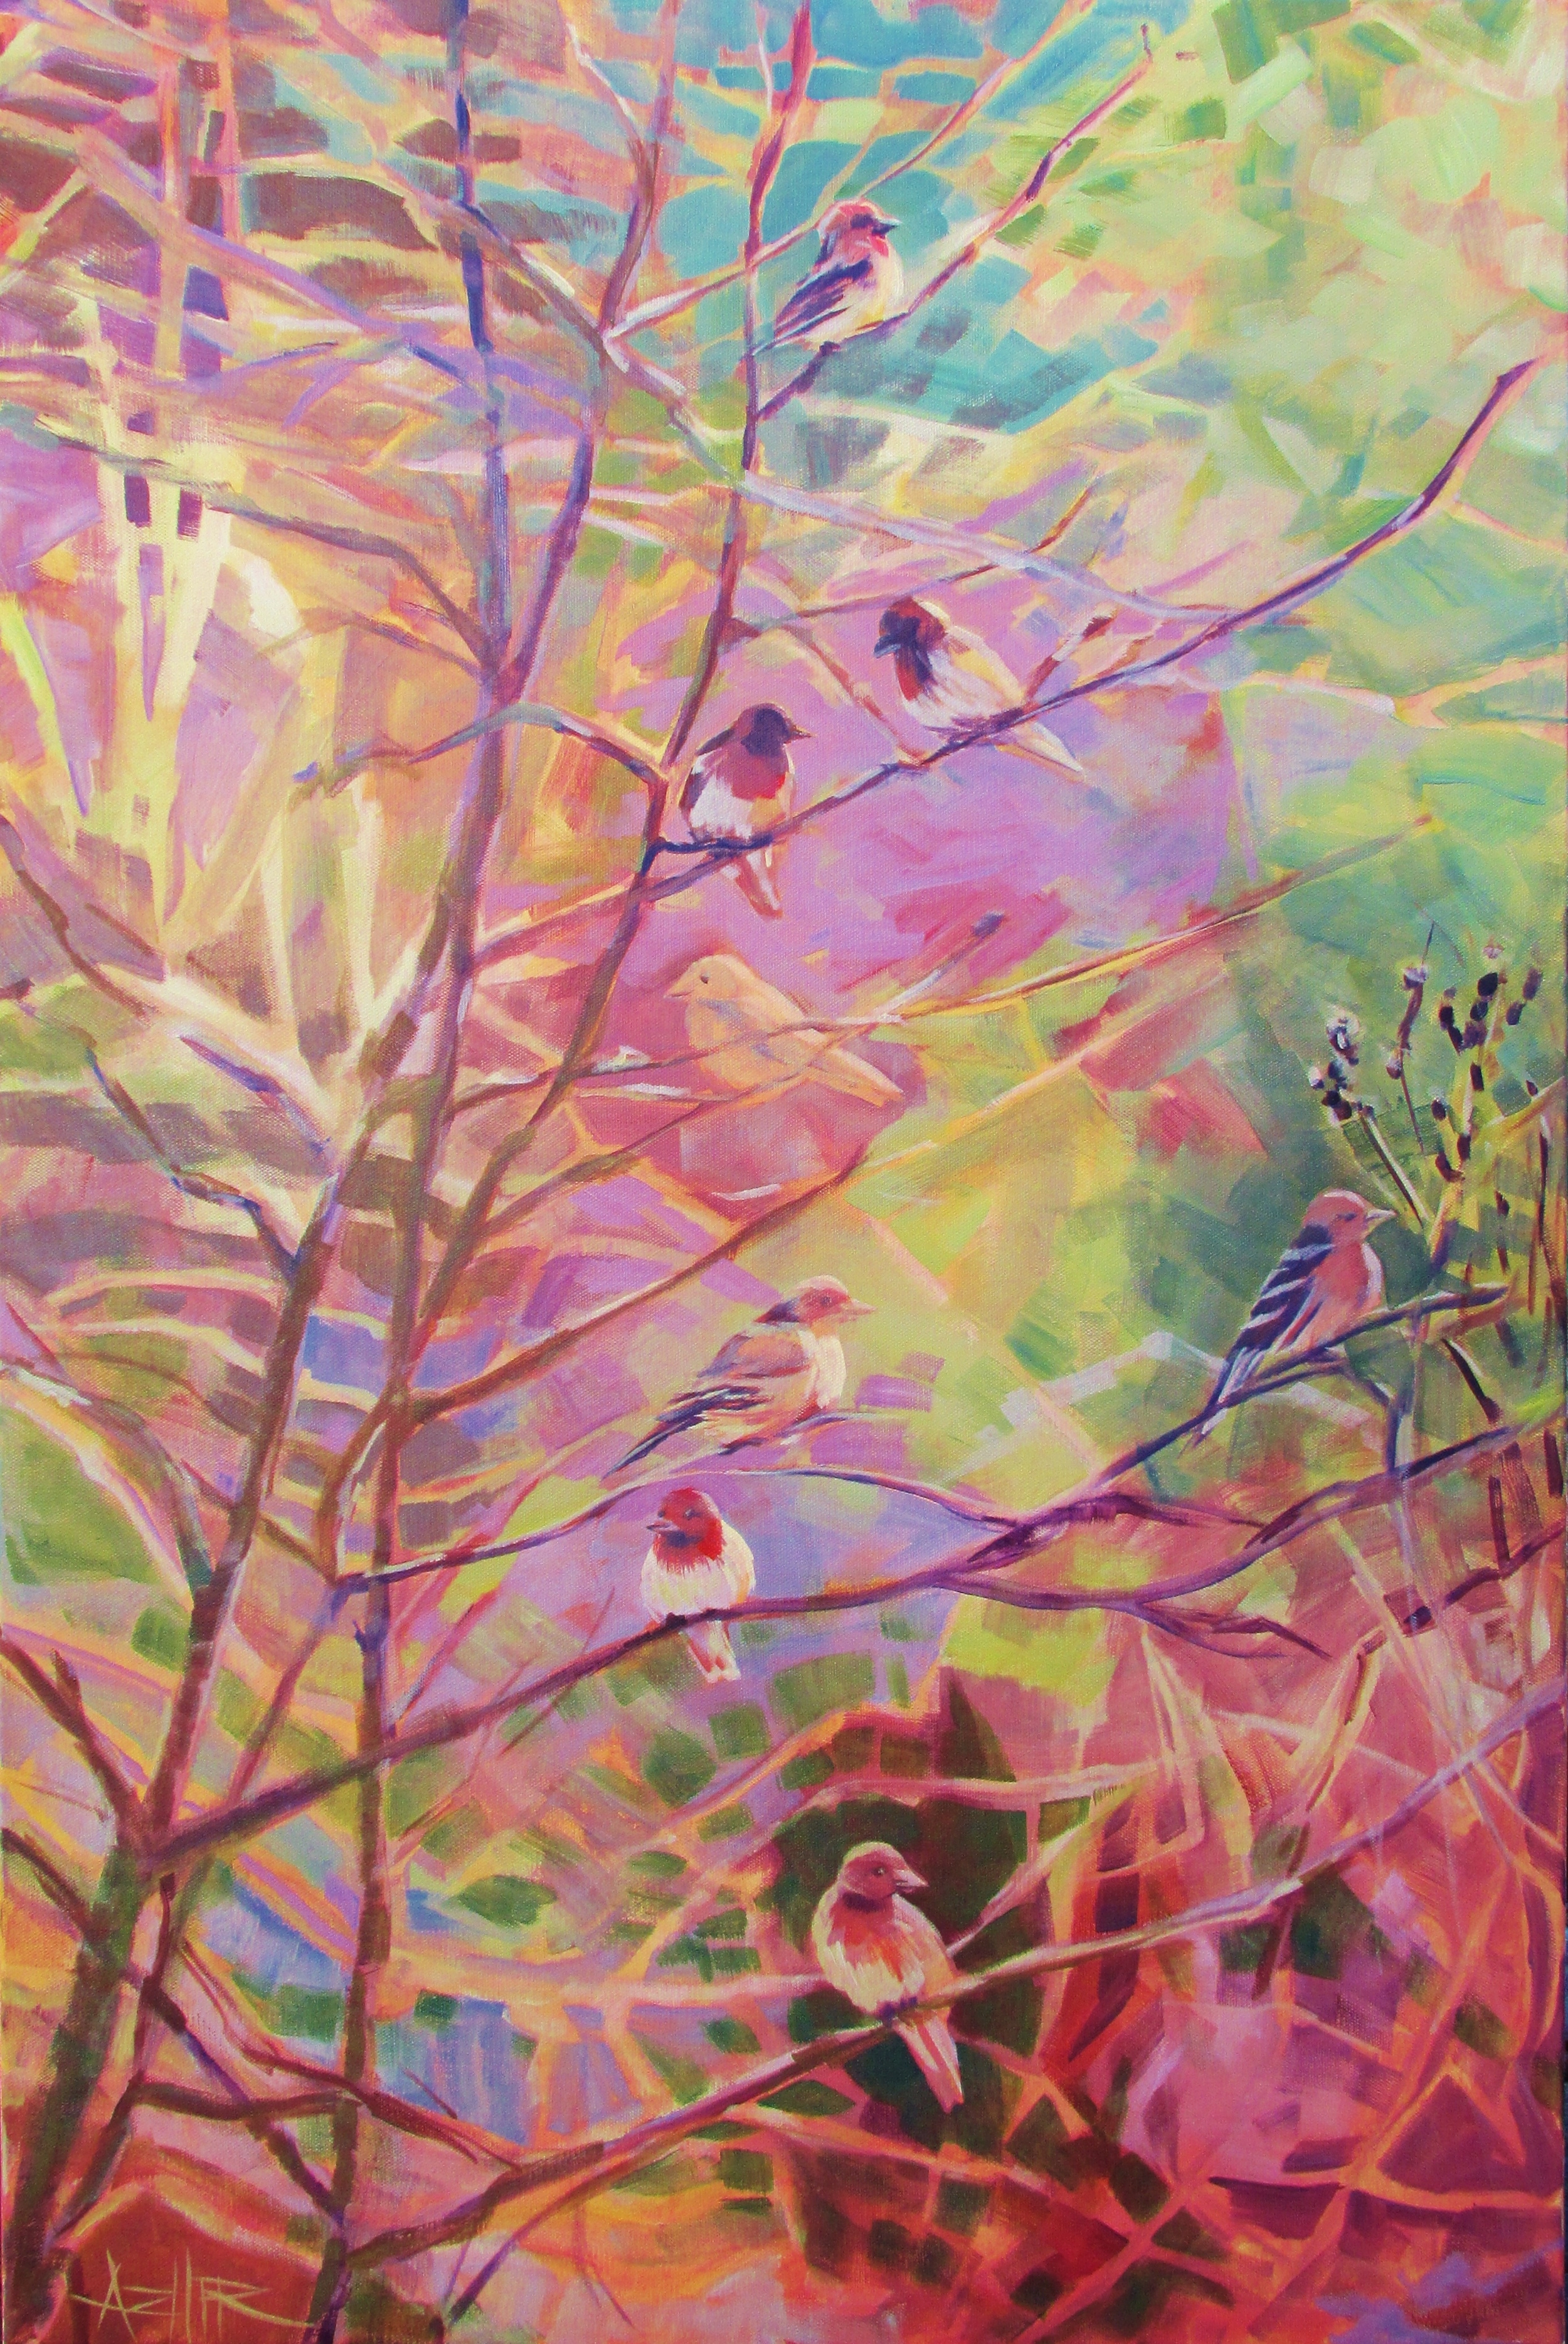 SOLD, Birds in the Thicket, Copyright 2016 Hirschten, Acrylic on Canvas, 24" x 36"